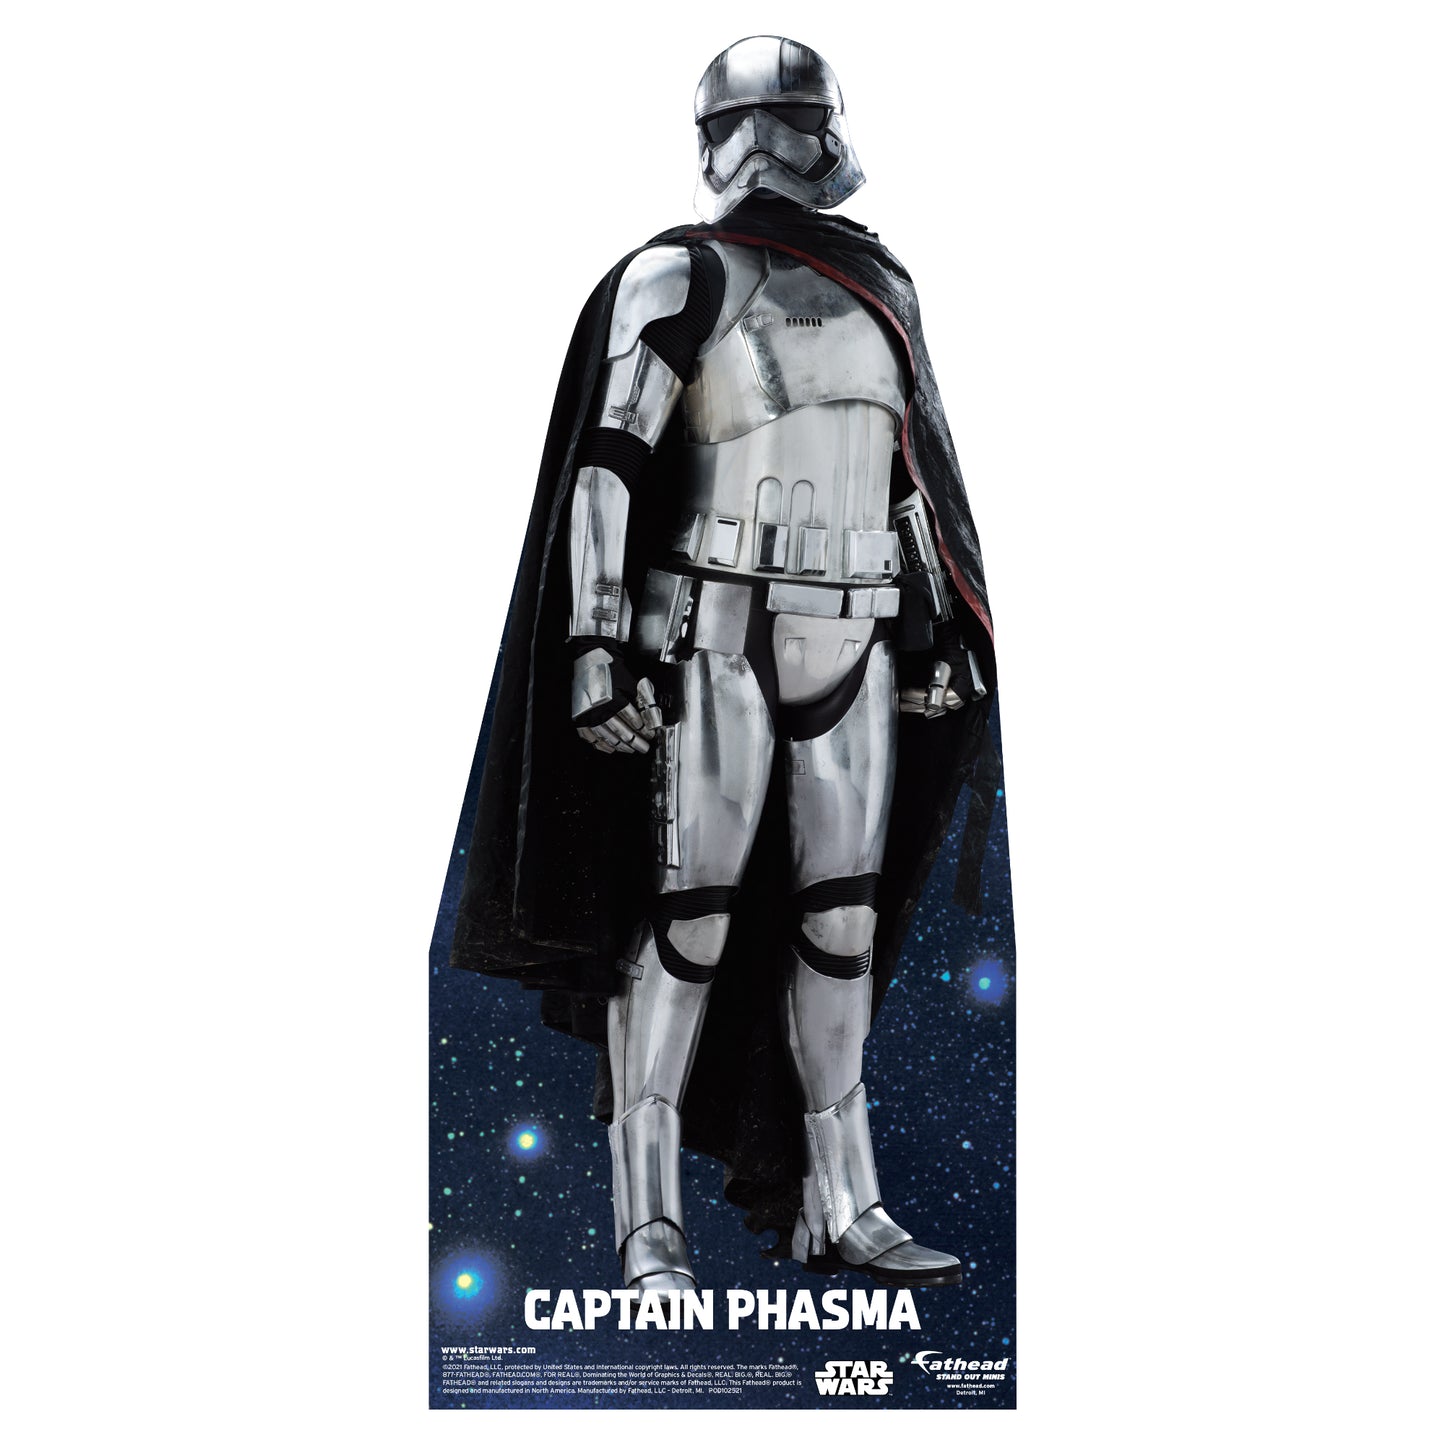 Sequel Trilogy: Captain Phasma Episode VII Mini Cardstock Cutout - Officially Licensed Star Wars Stand Out